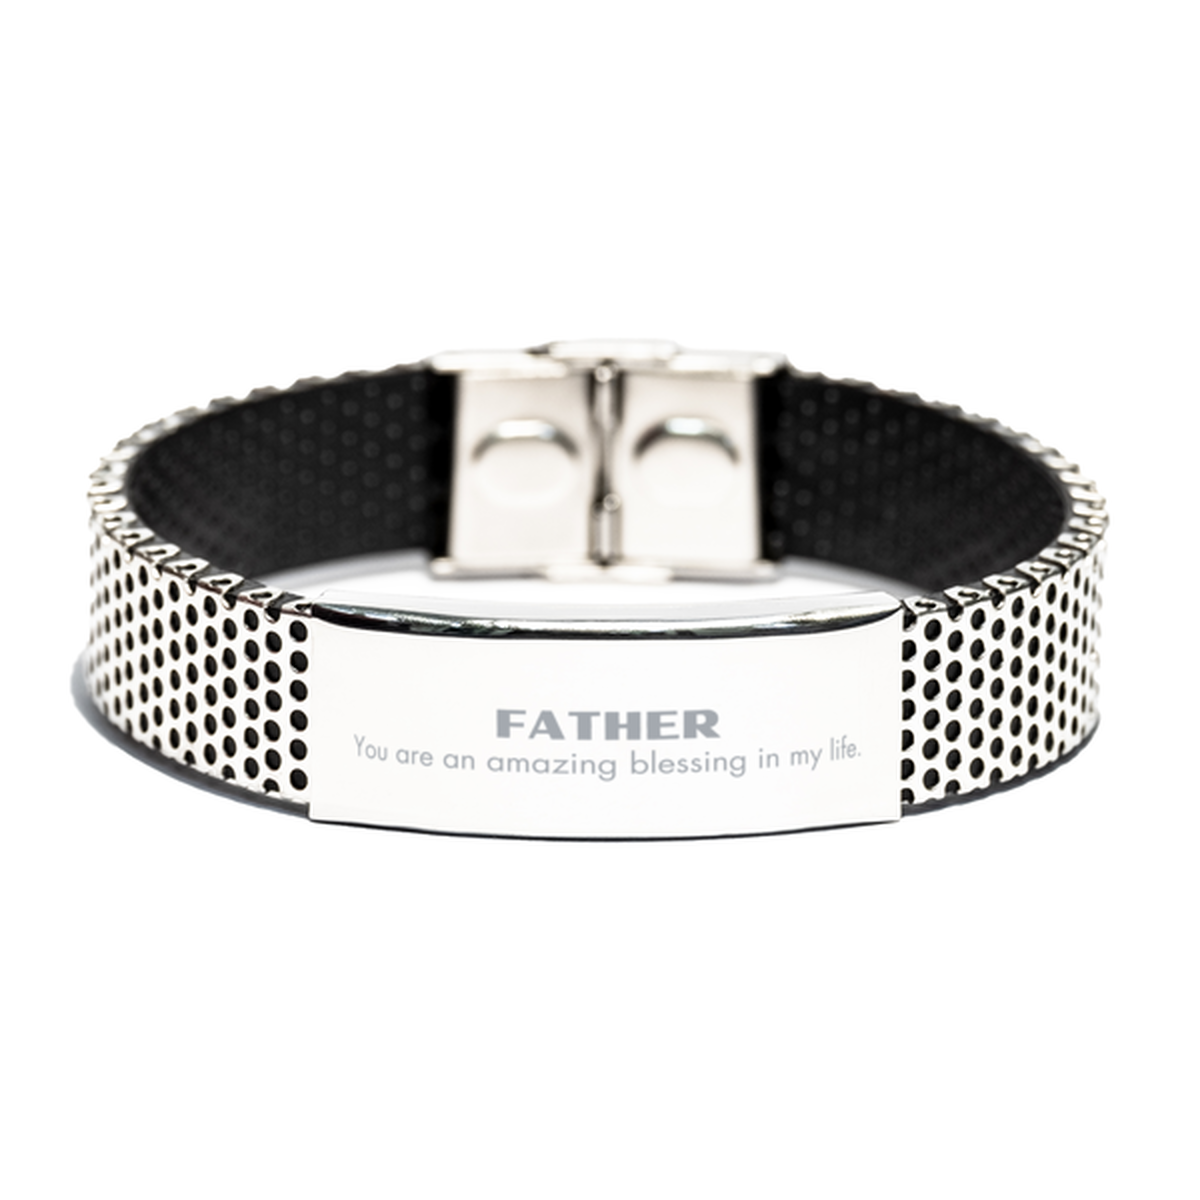 Father Stainless Steel Bracelet, You are an amazing blessing in my life, Thank You Gifts For Father, Inspirational Birthday Christmas Unique Gifts For Father